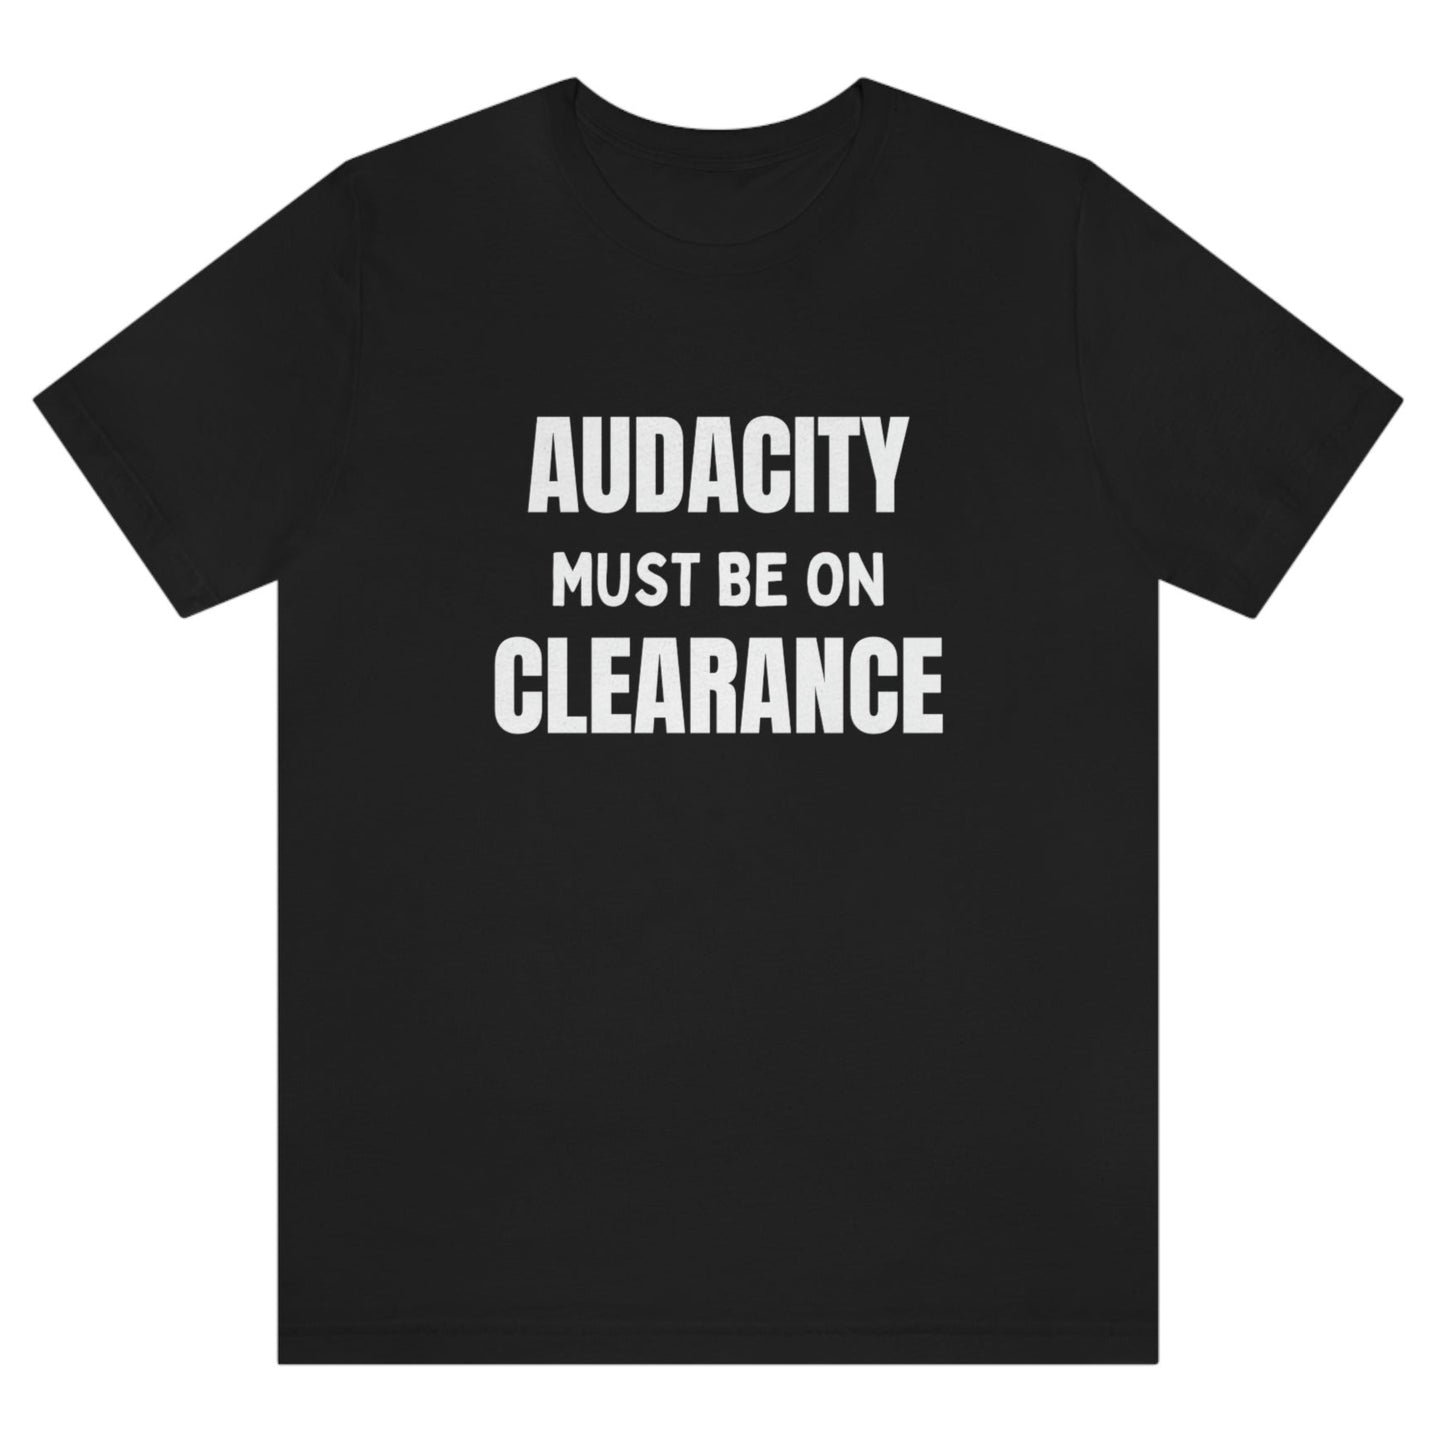 audacity-must-be-on-clearance-black-t-shirt-unisex-funny